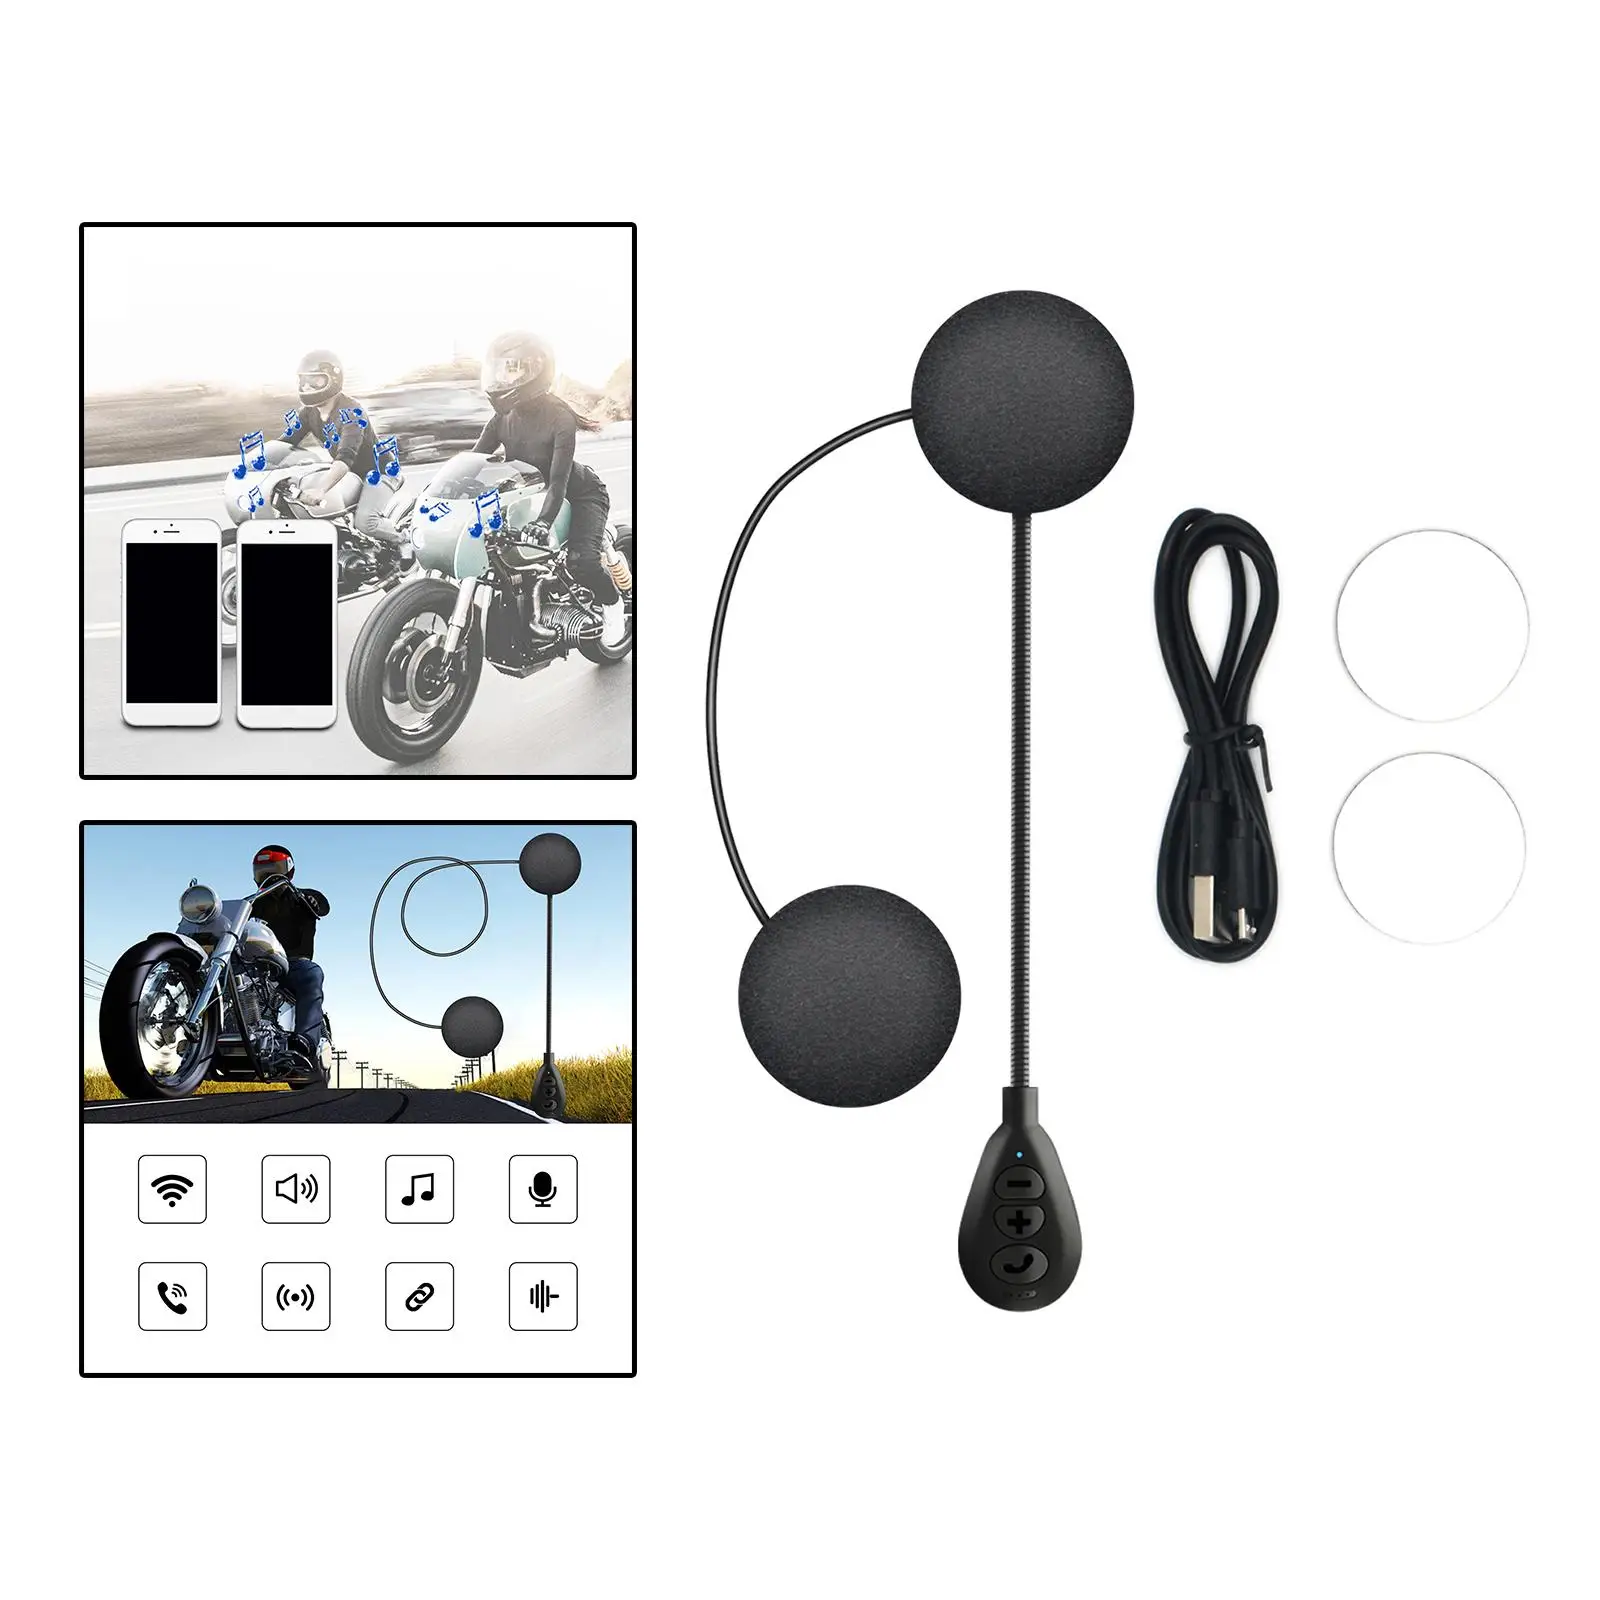 Motorcycle Bluetooth Helmet Headset Easy Set up Volume Control Noise Cancelling Stereo 180mAh Battery Earphone for Riding